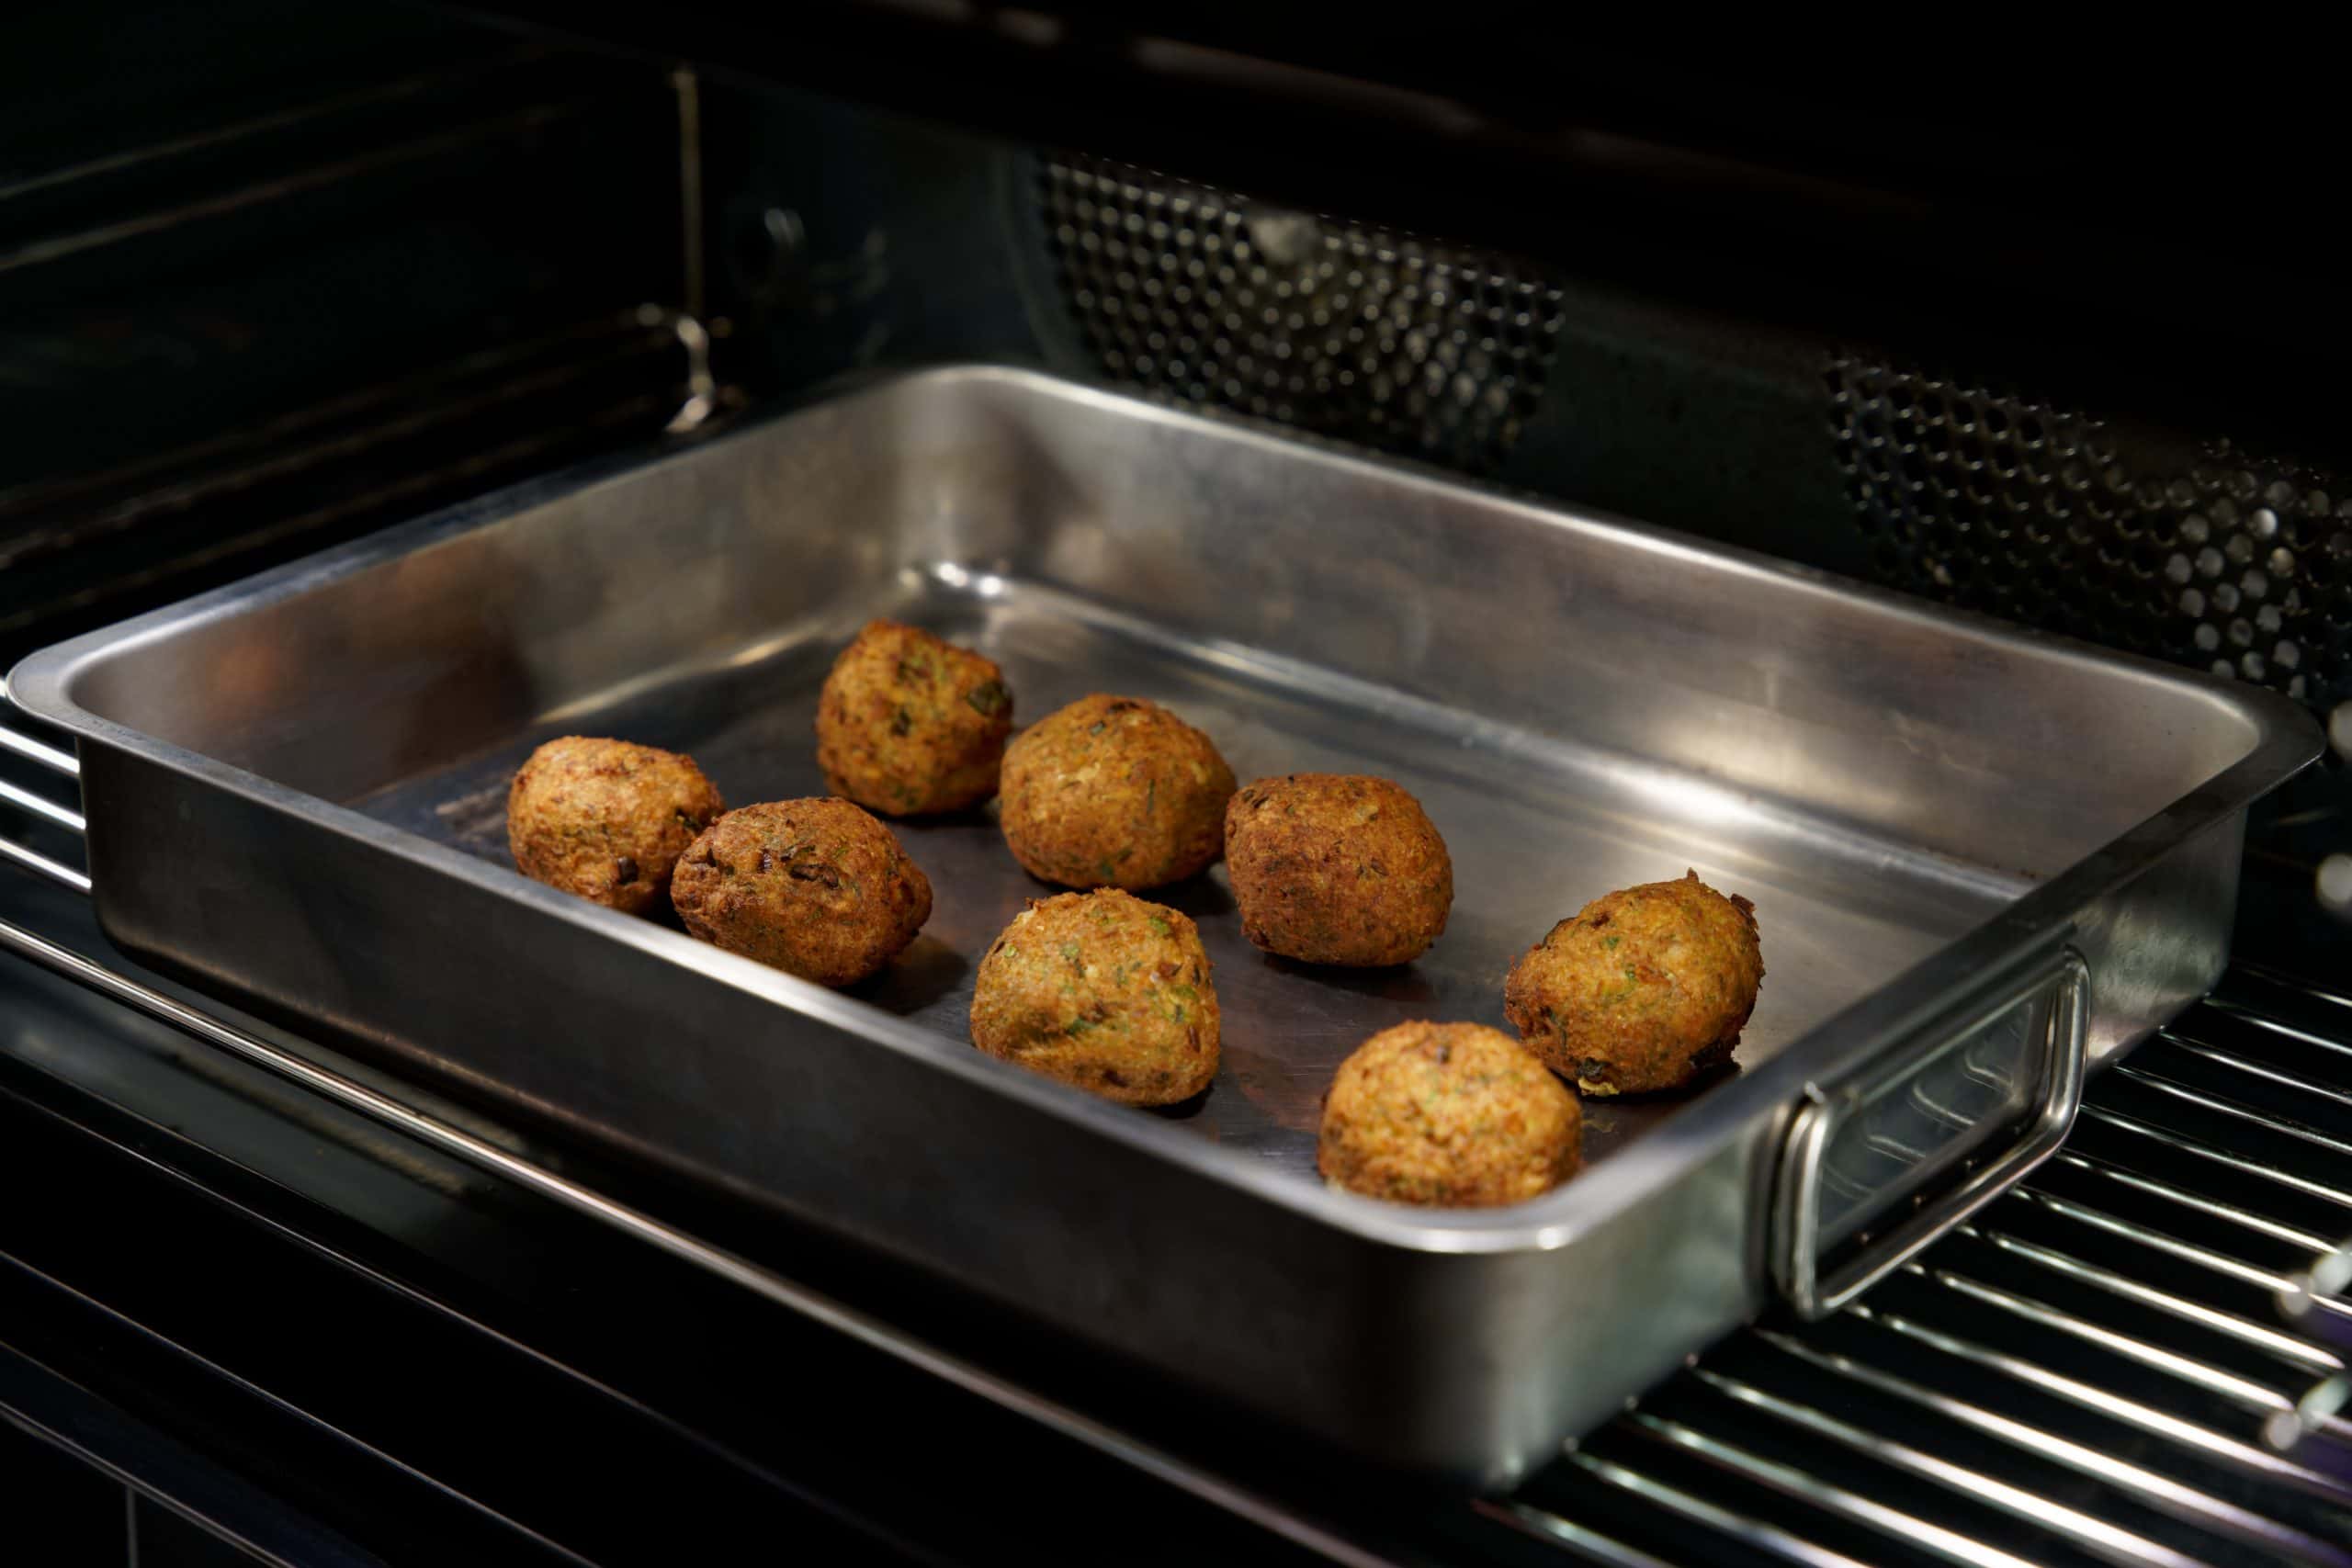 Traditional Greek Kolokithokeftedes (Fried Zucchini/Courgette Balls) baked